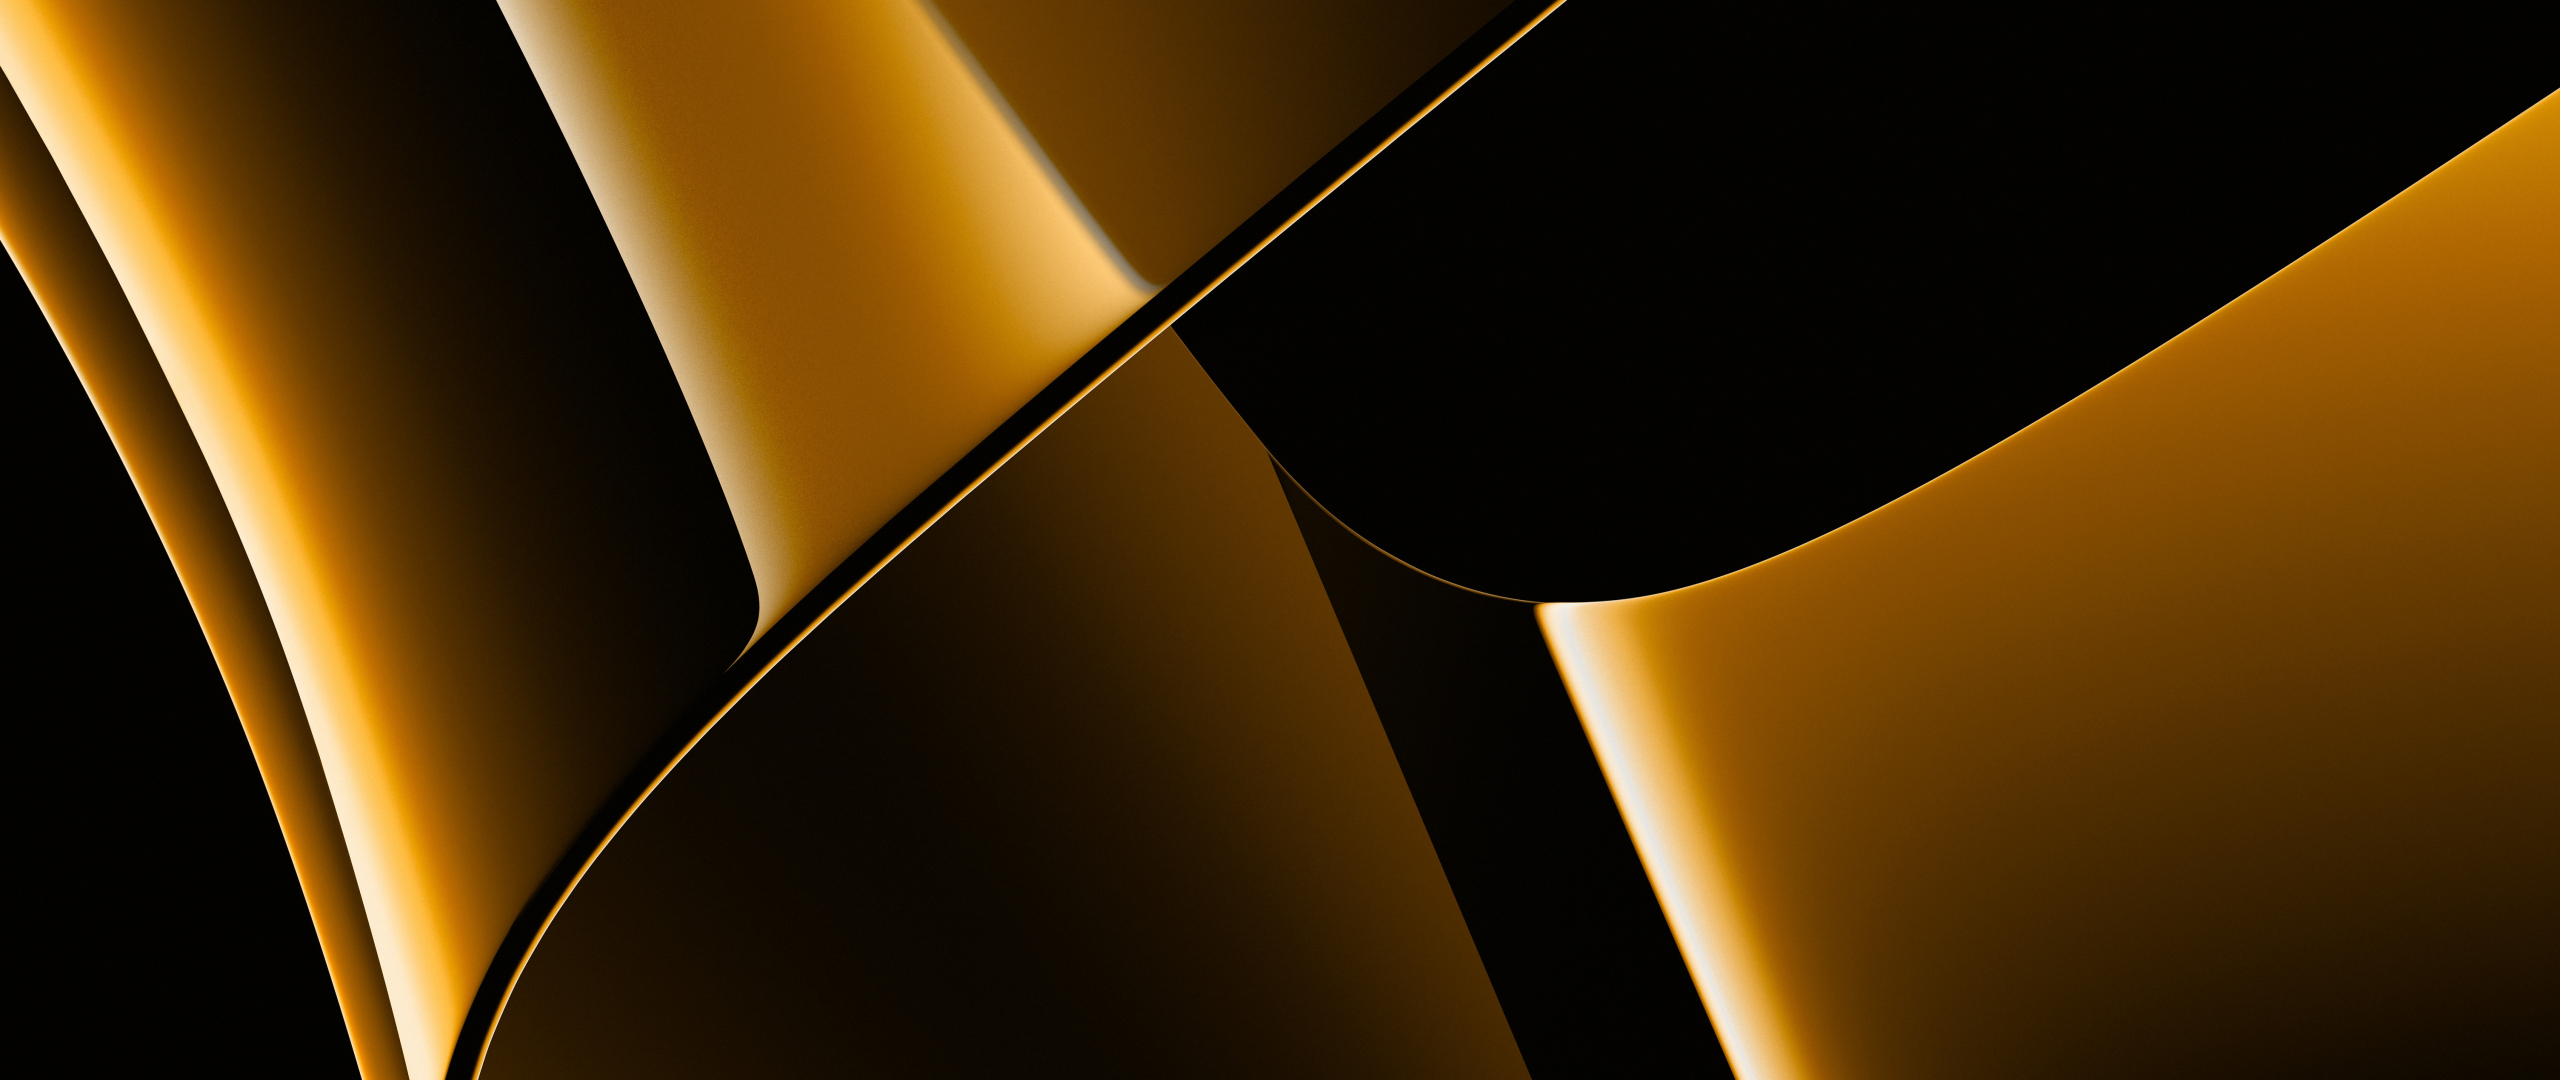 Golden surface, abstract, shapes, 2560x1080 wallpaper